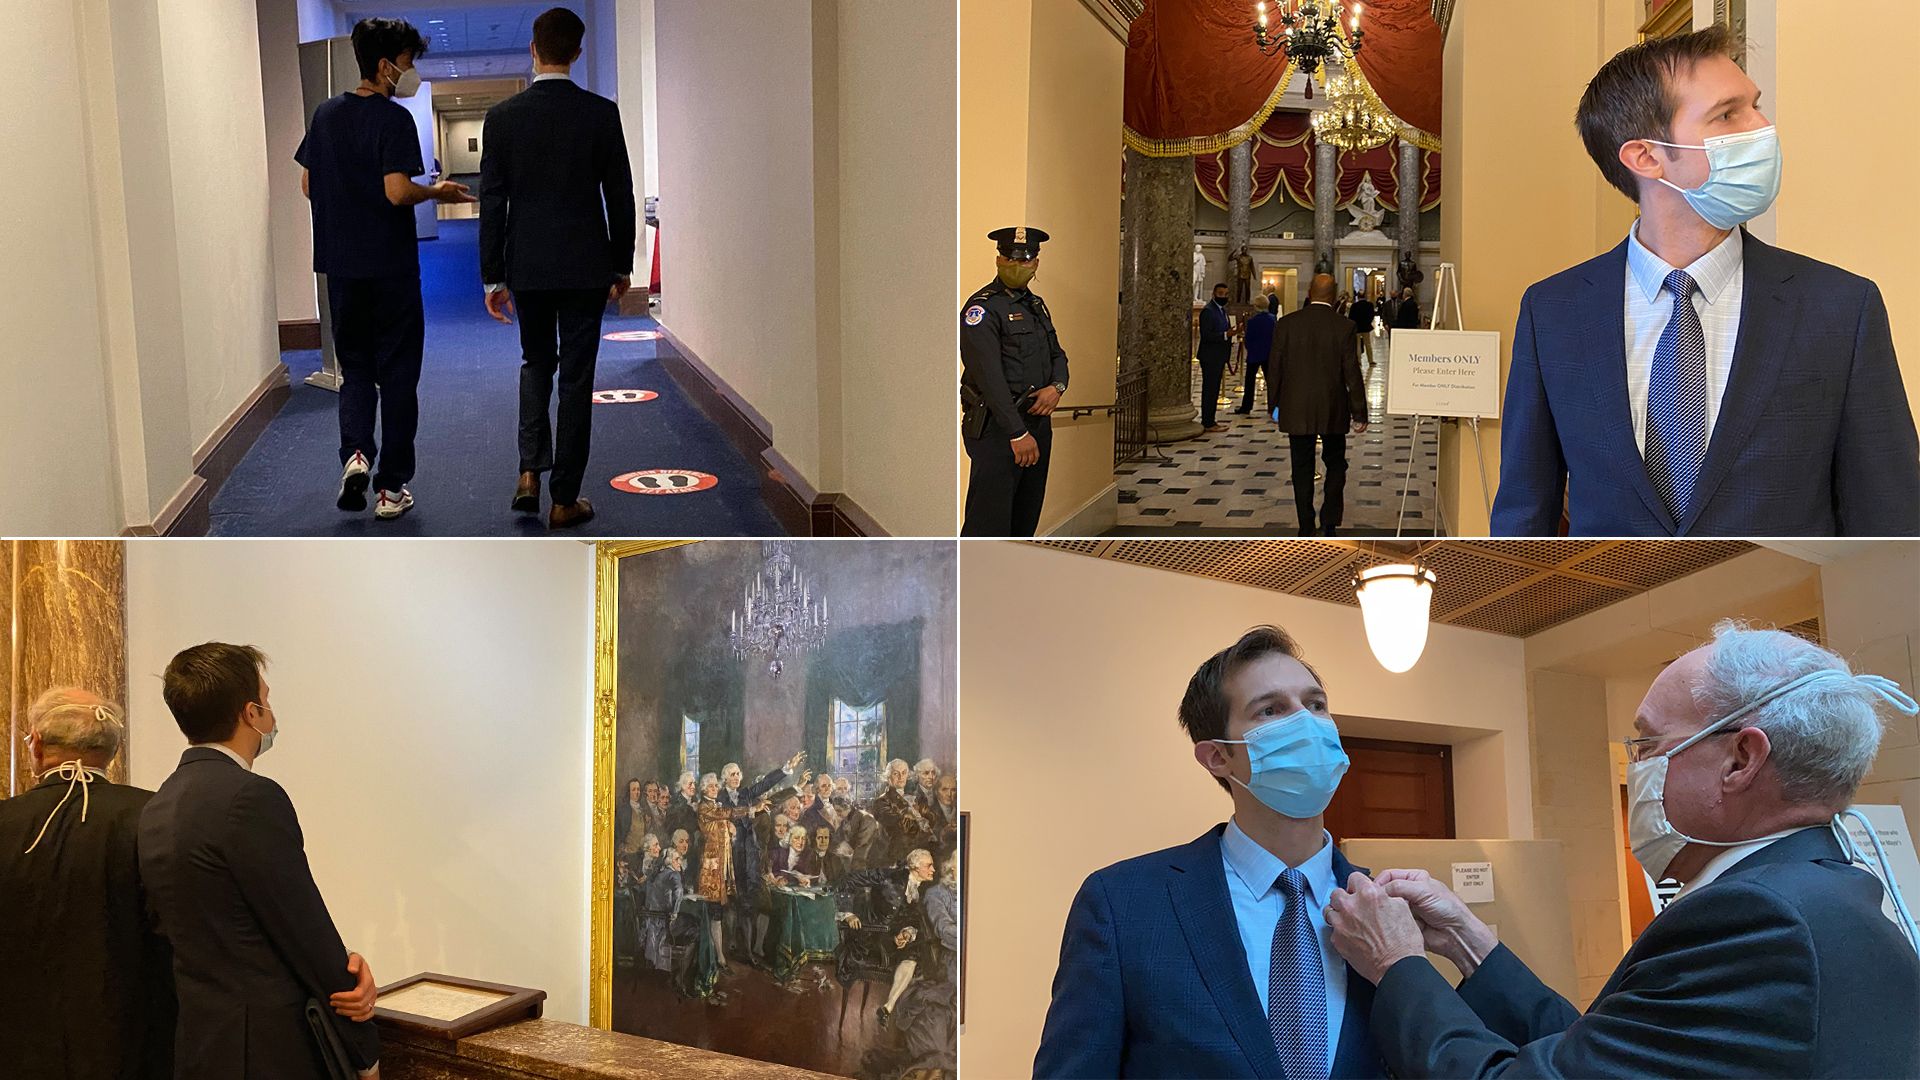 A photo array shows Representative-elect Jake Auchincloss on his first day in Congress.